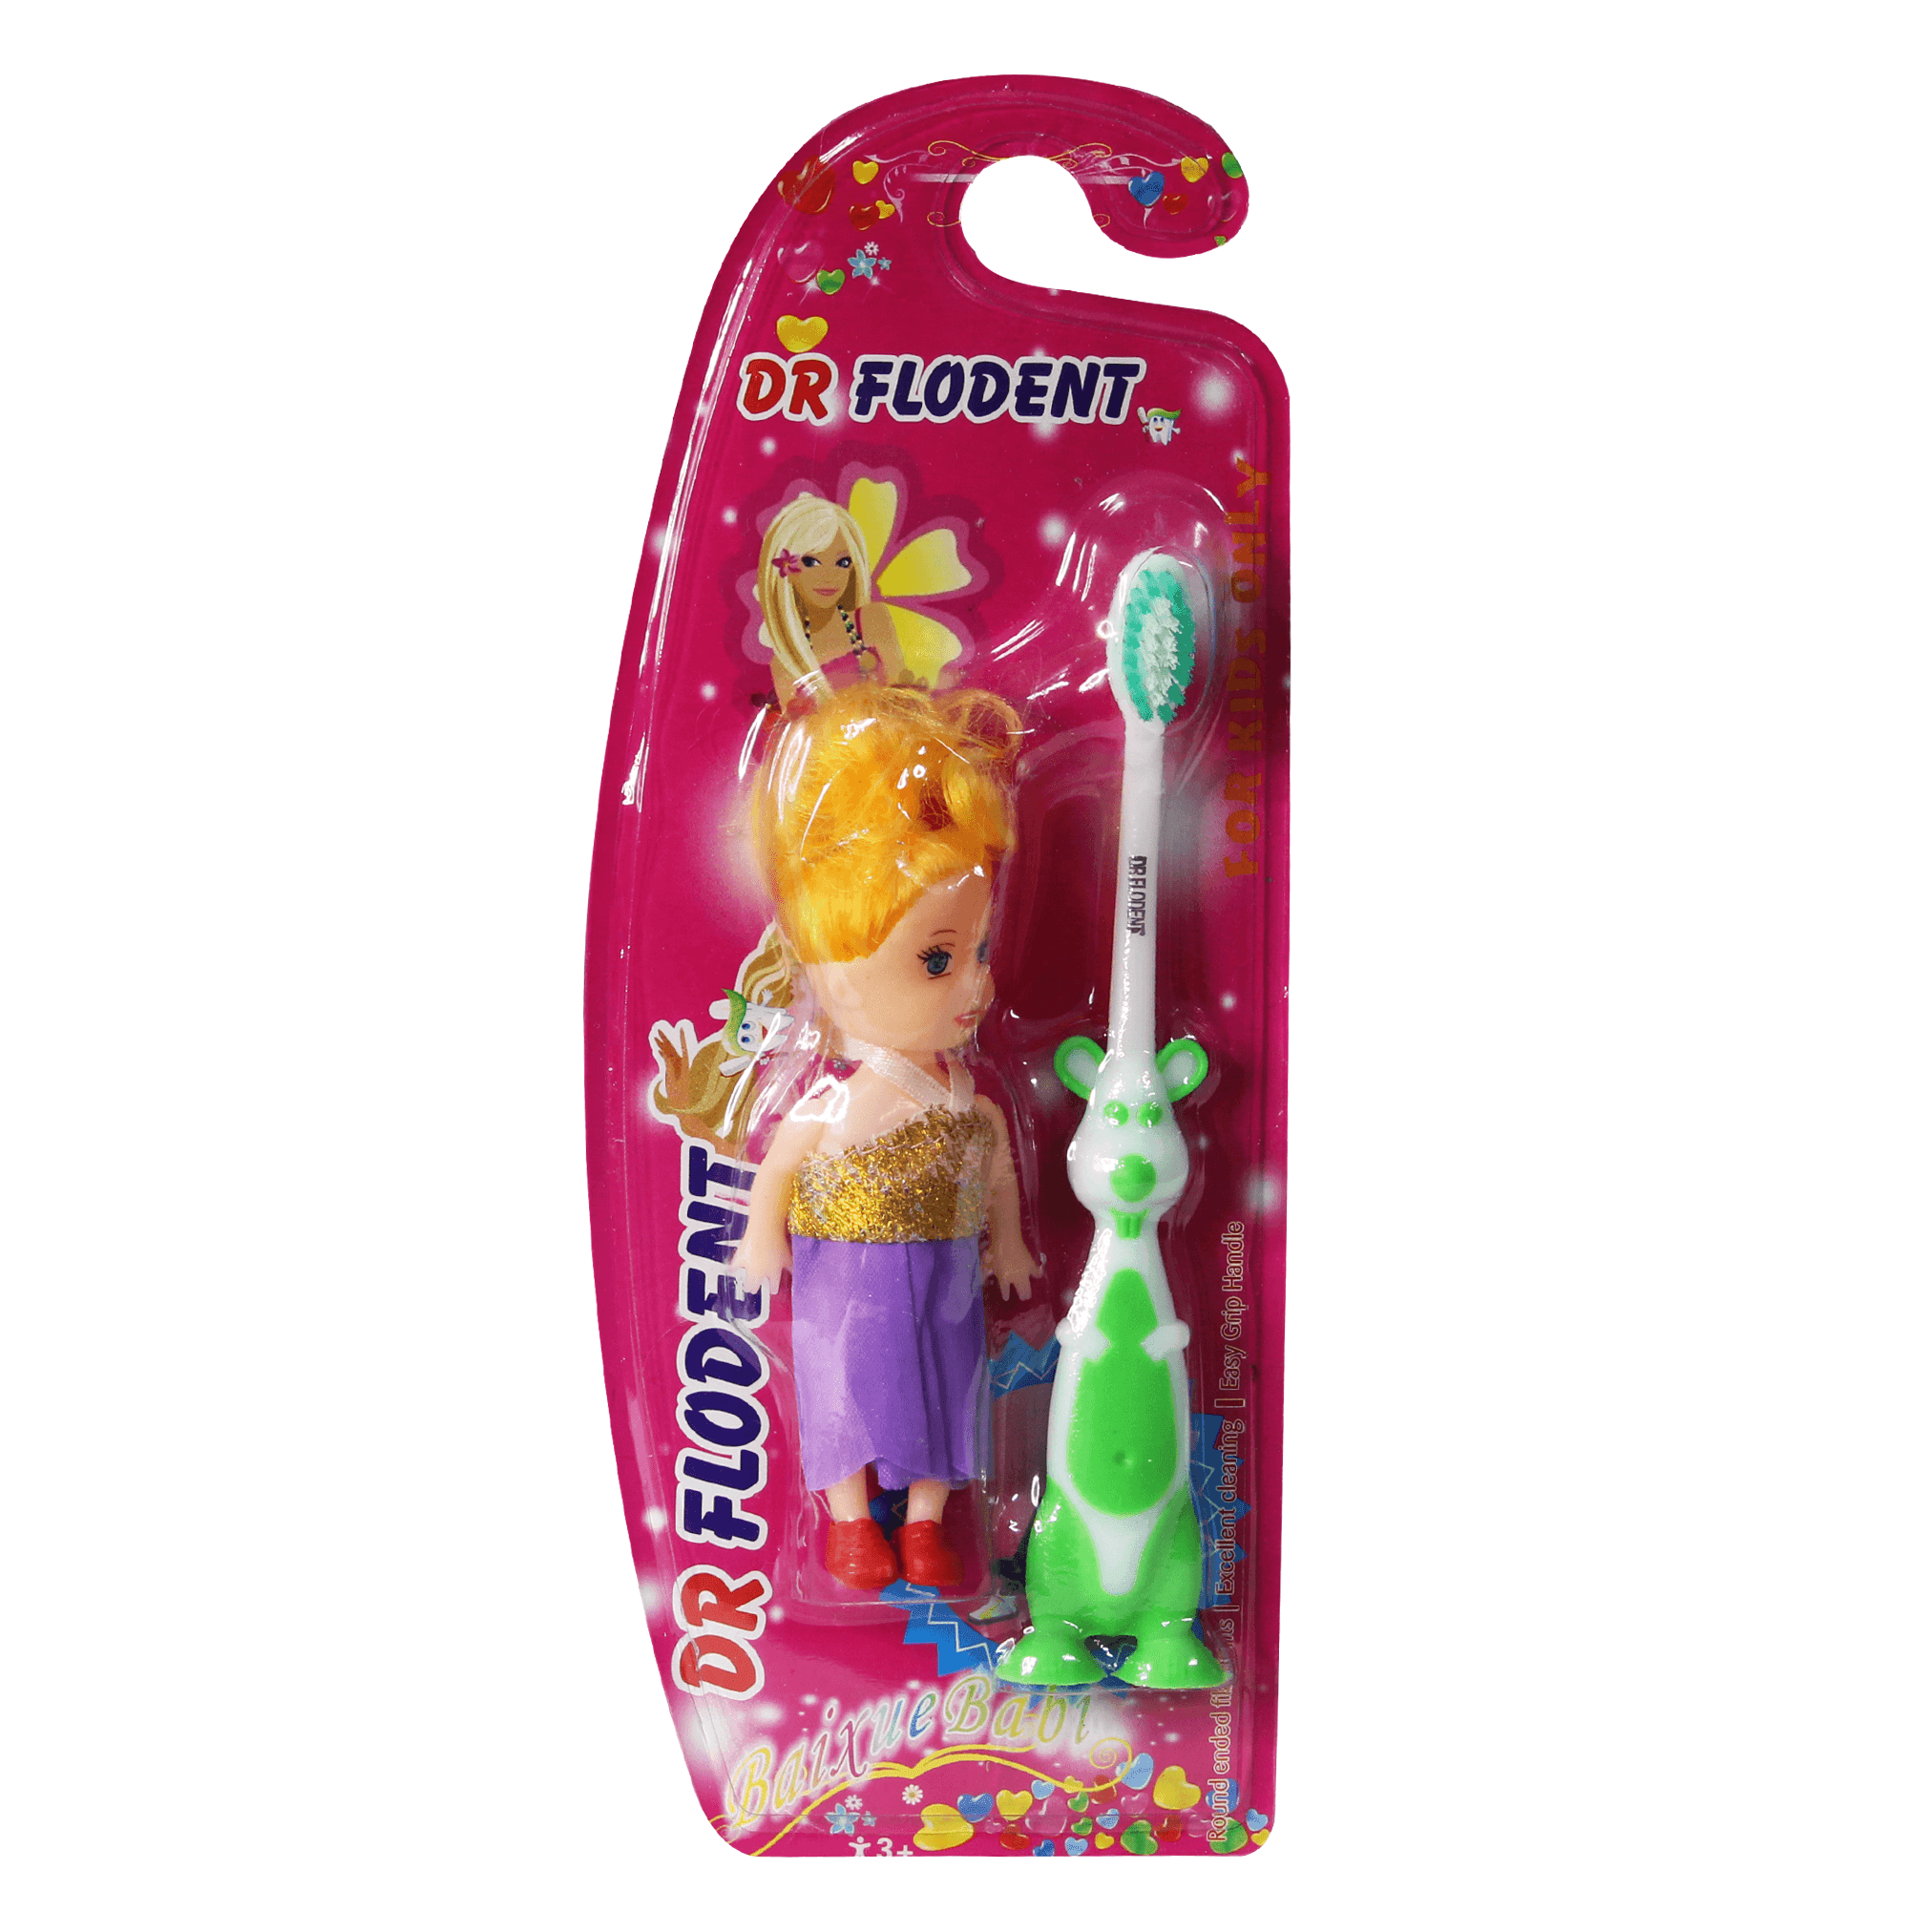 Dr Flodent Kids Toothbrush Extra Soft With Doll Toy - BumbleToys - 2-4 Years, 5-7 Years, Baby Saftey & Health, Girls, Toothbrush